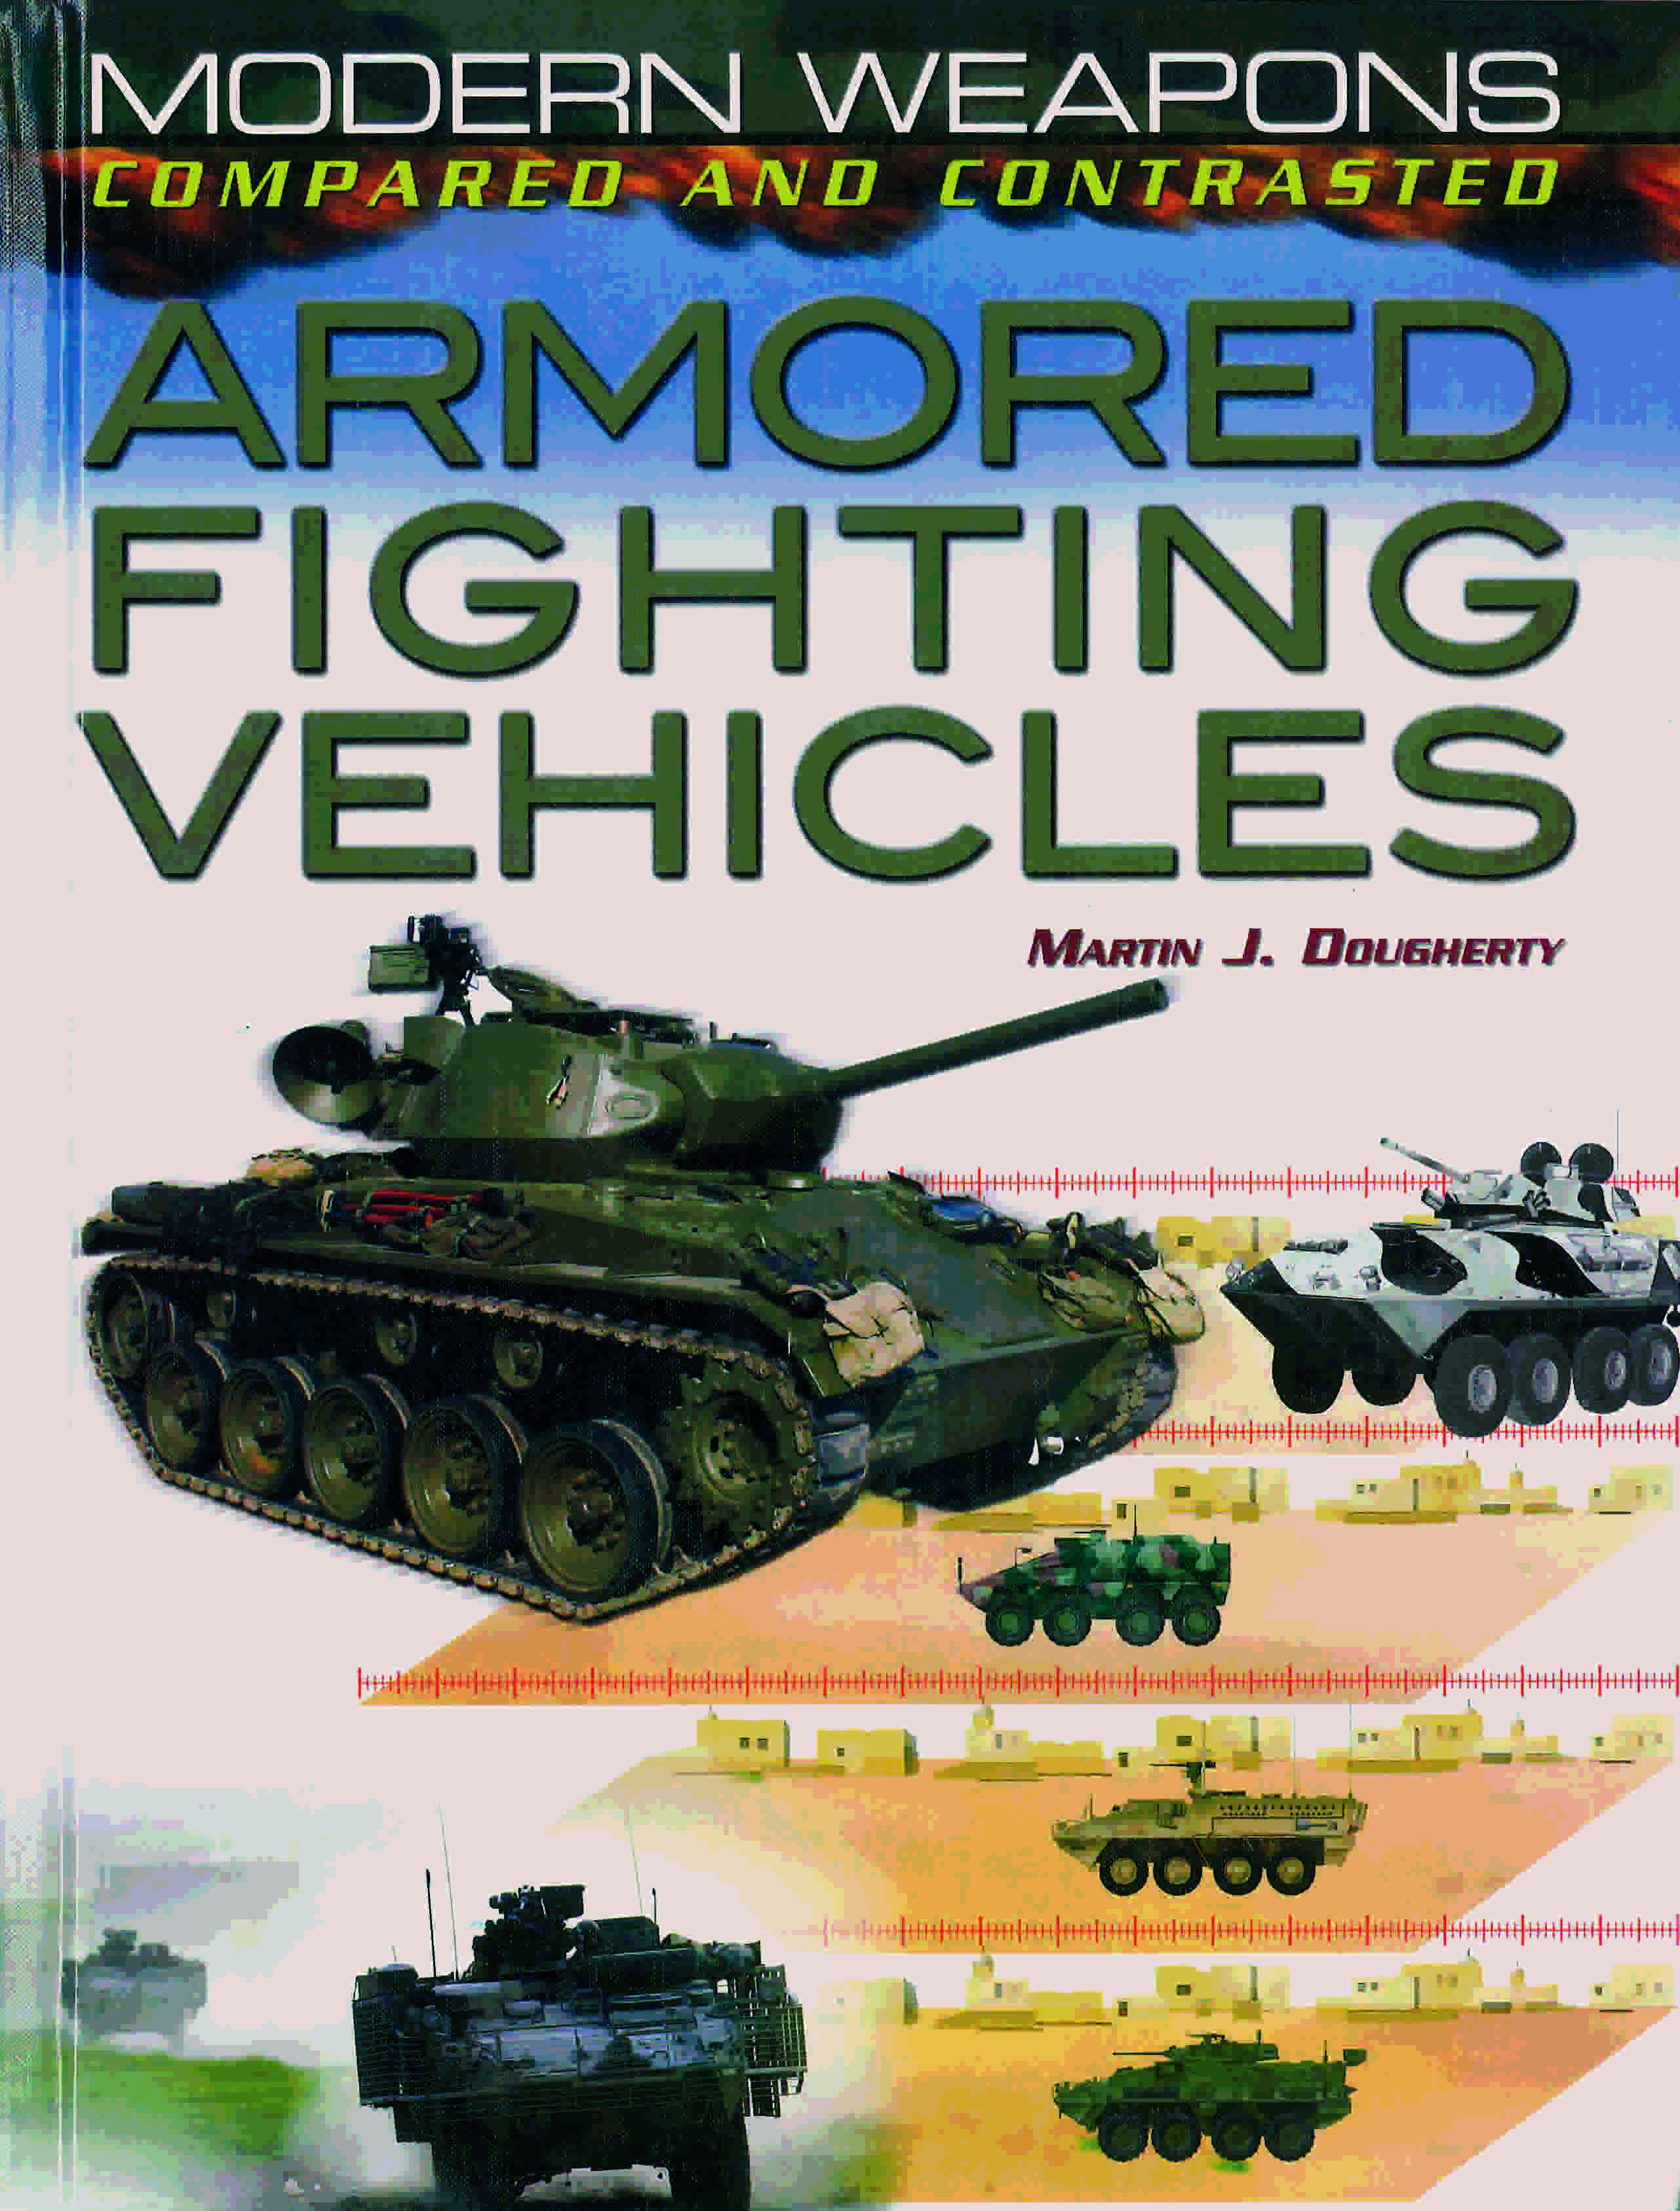 Modern Weapons Compared And Contrasted: Armored Fighting Vehicles